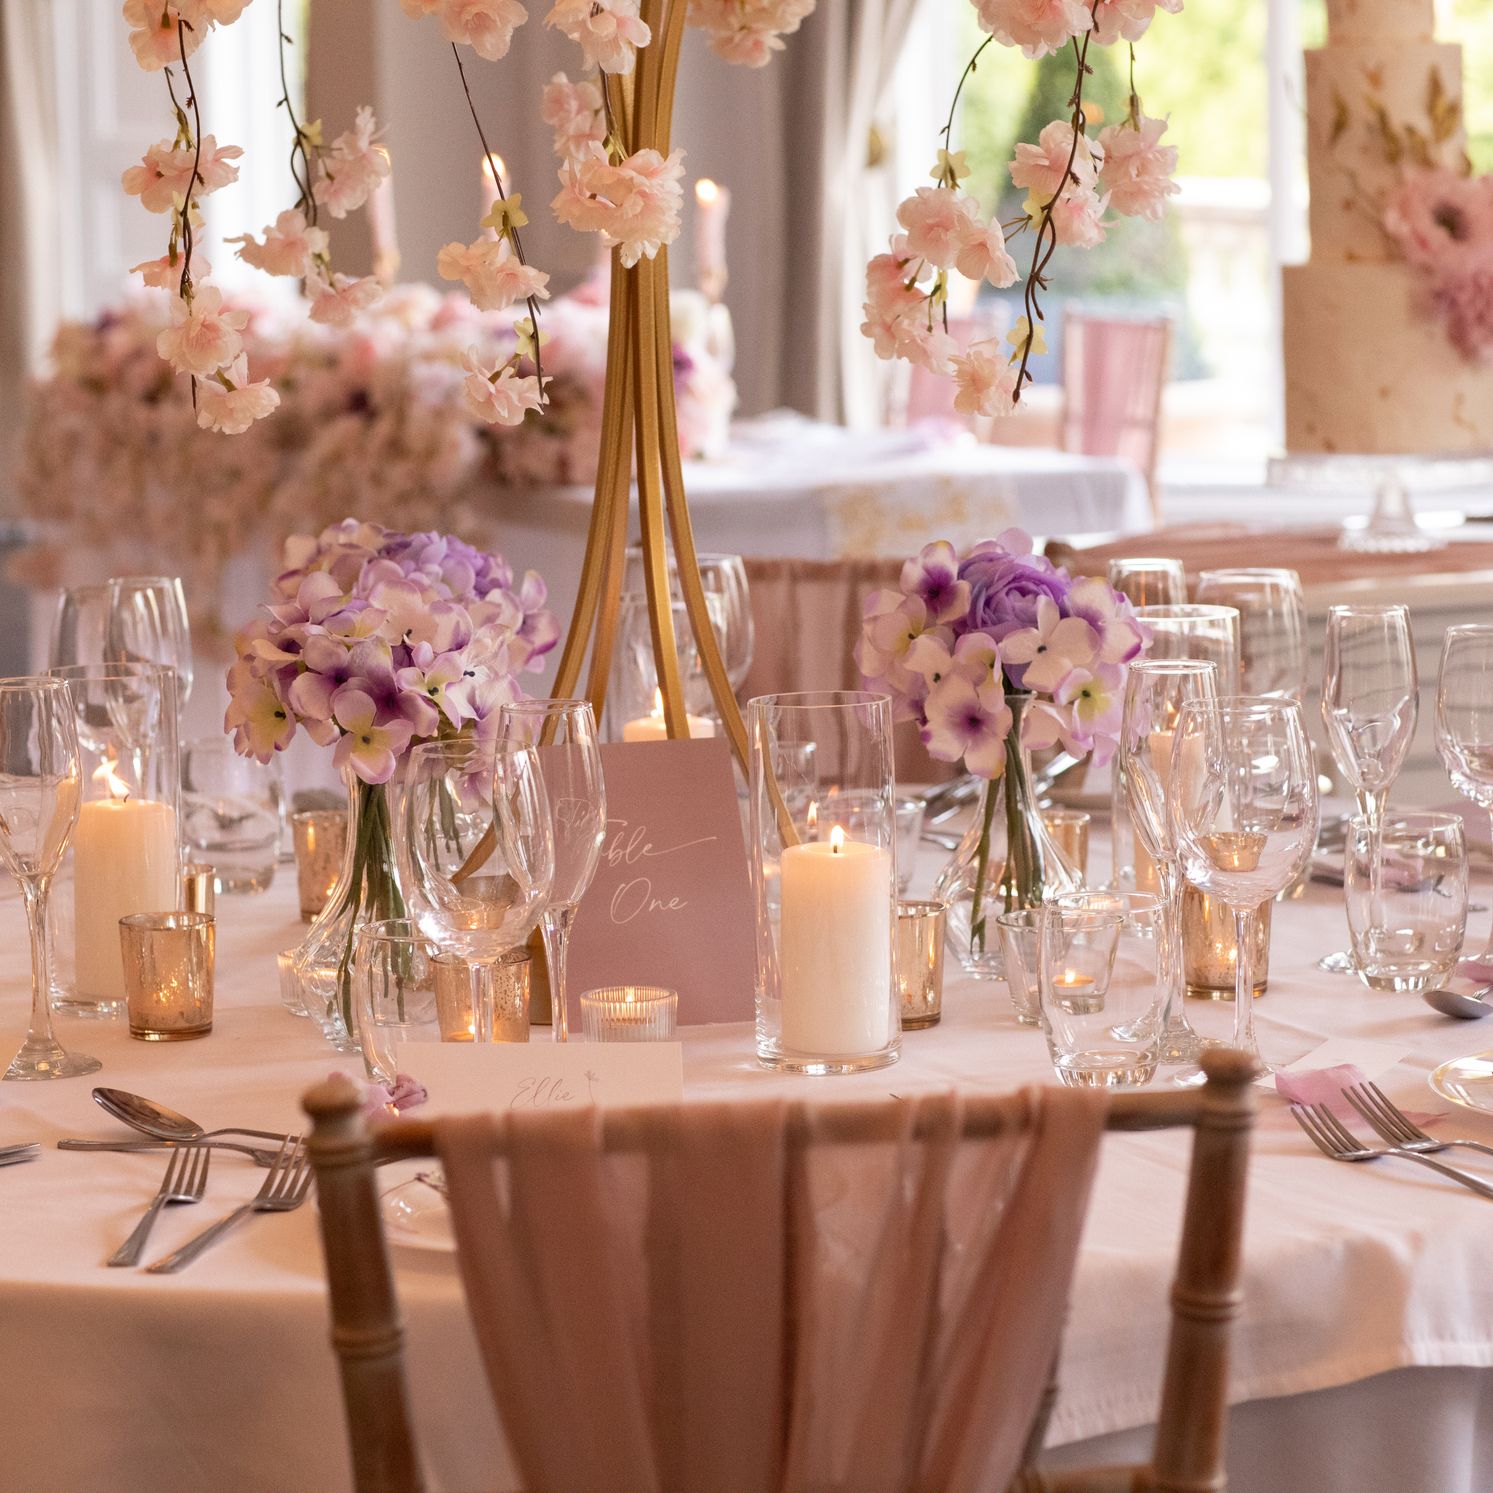 Pink wedding table decor and styling to hire in Cheshire & Manchester